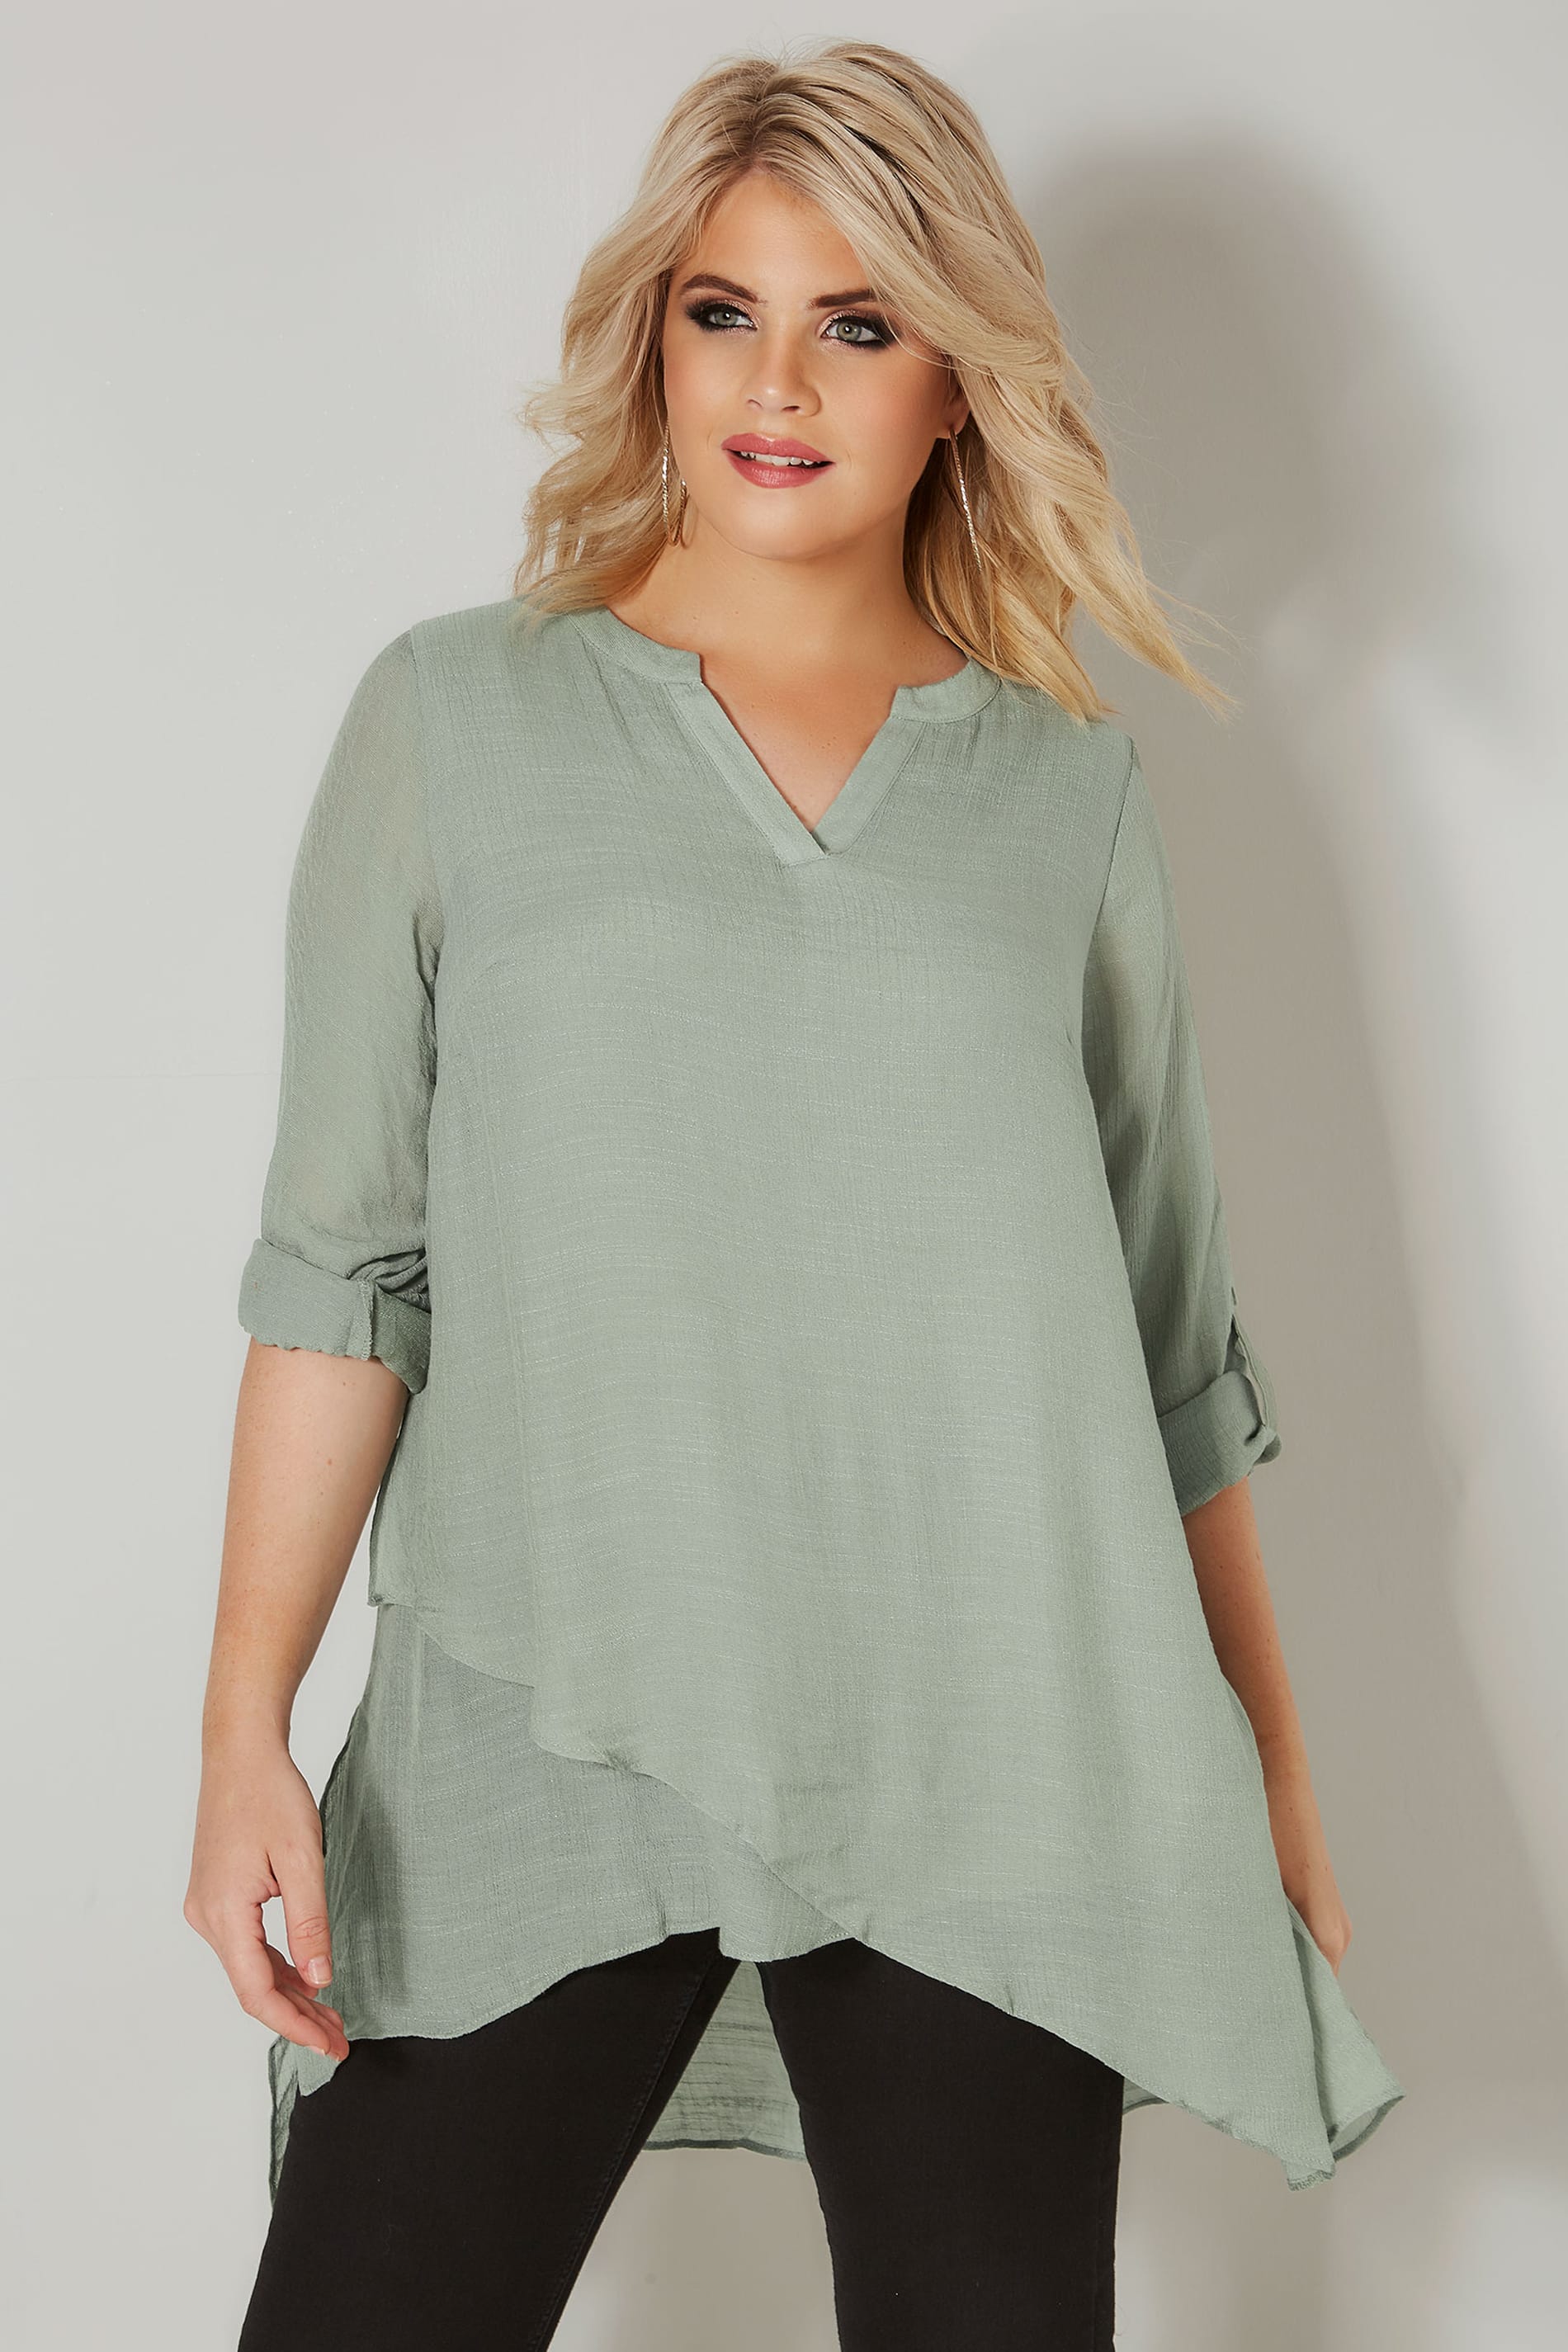 Green Layered Blouse With Notch Neck & Dipped Hem, plus size 16 to 36